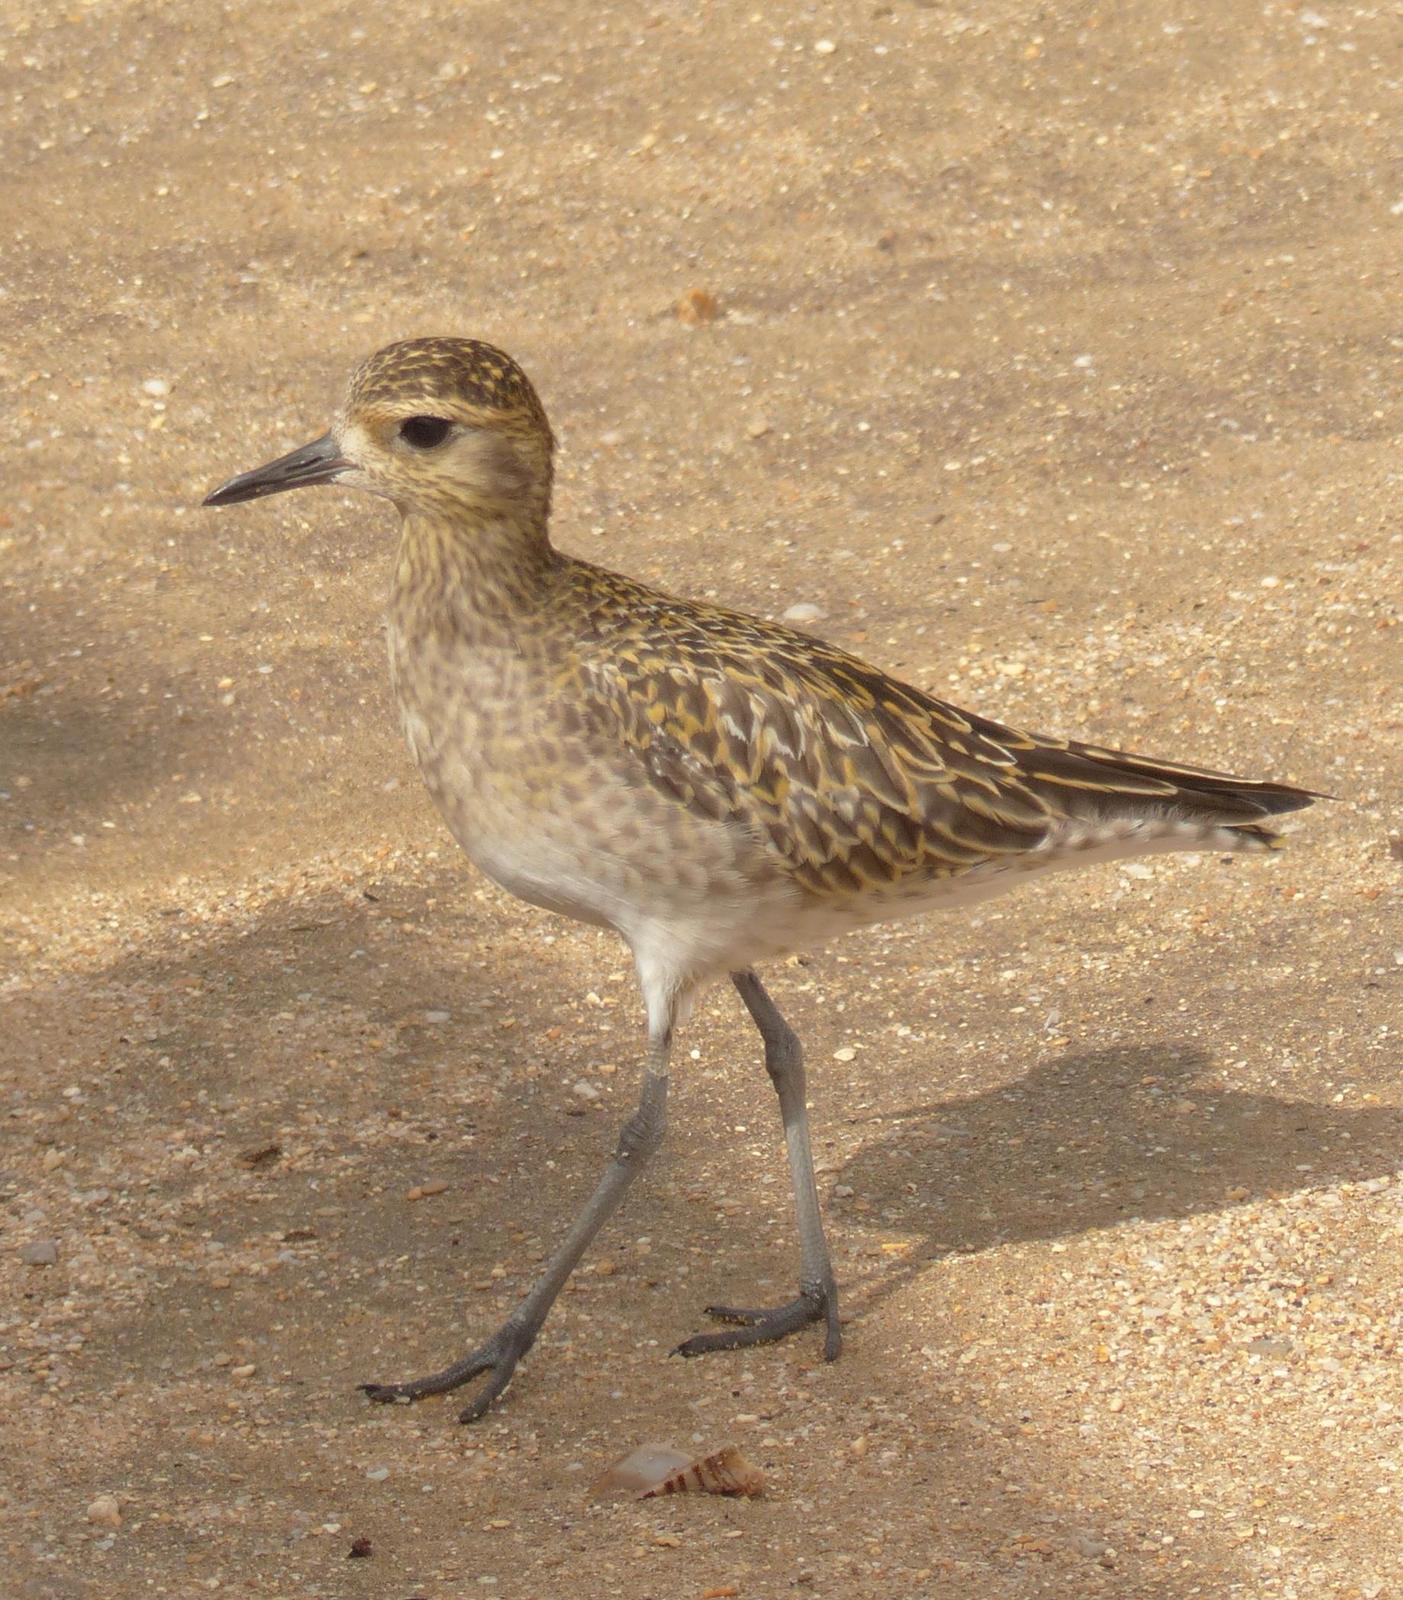 Pacific Golden-Plover Photo by David Bell